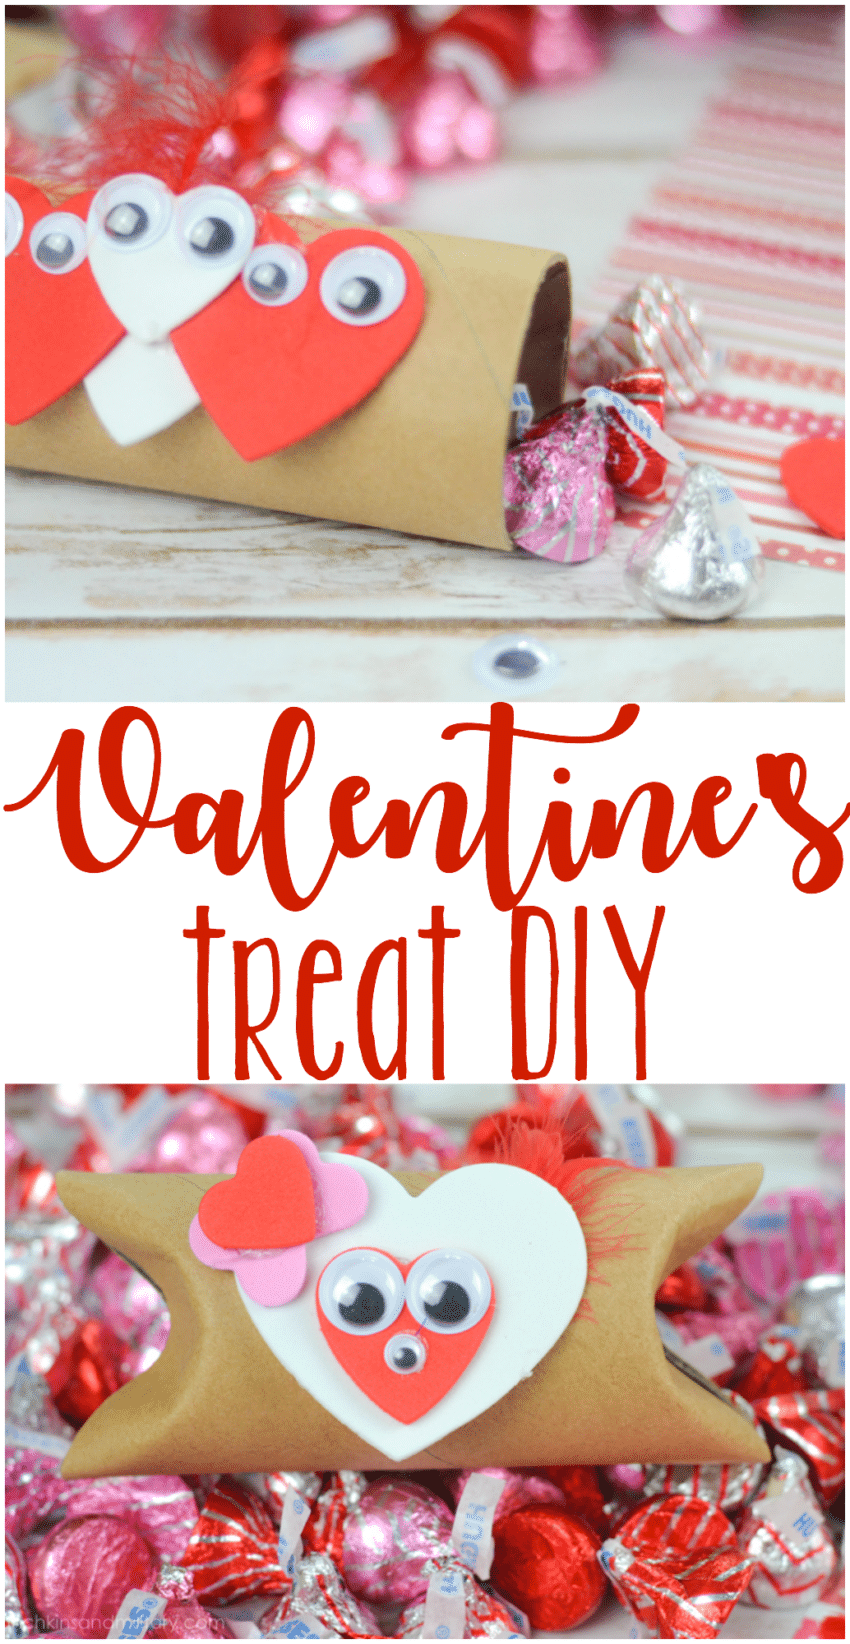 Fun DIY craft idea for the whole family! Perfect for creating classroom Valentine's treats!